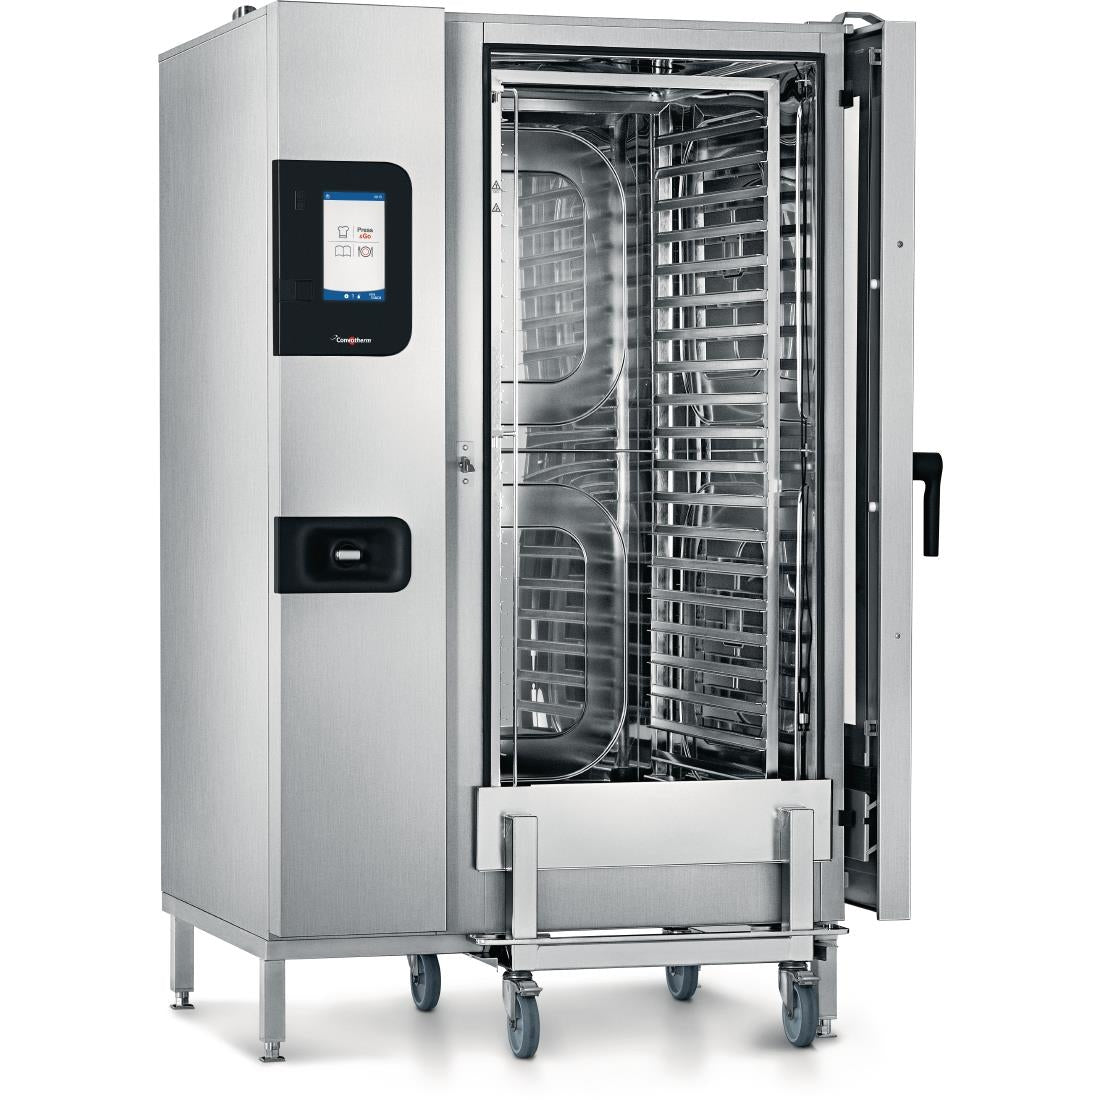 DR437-MO Convotherm 4 easyTouch Combi Oven 20 x 2 x1 GN Grid JD Catering Equipment Solutions Ltd